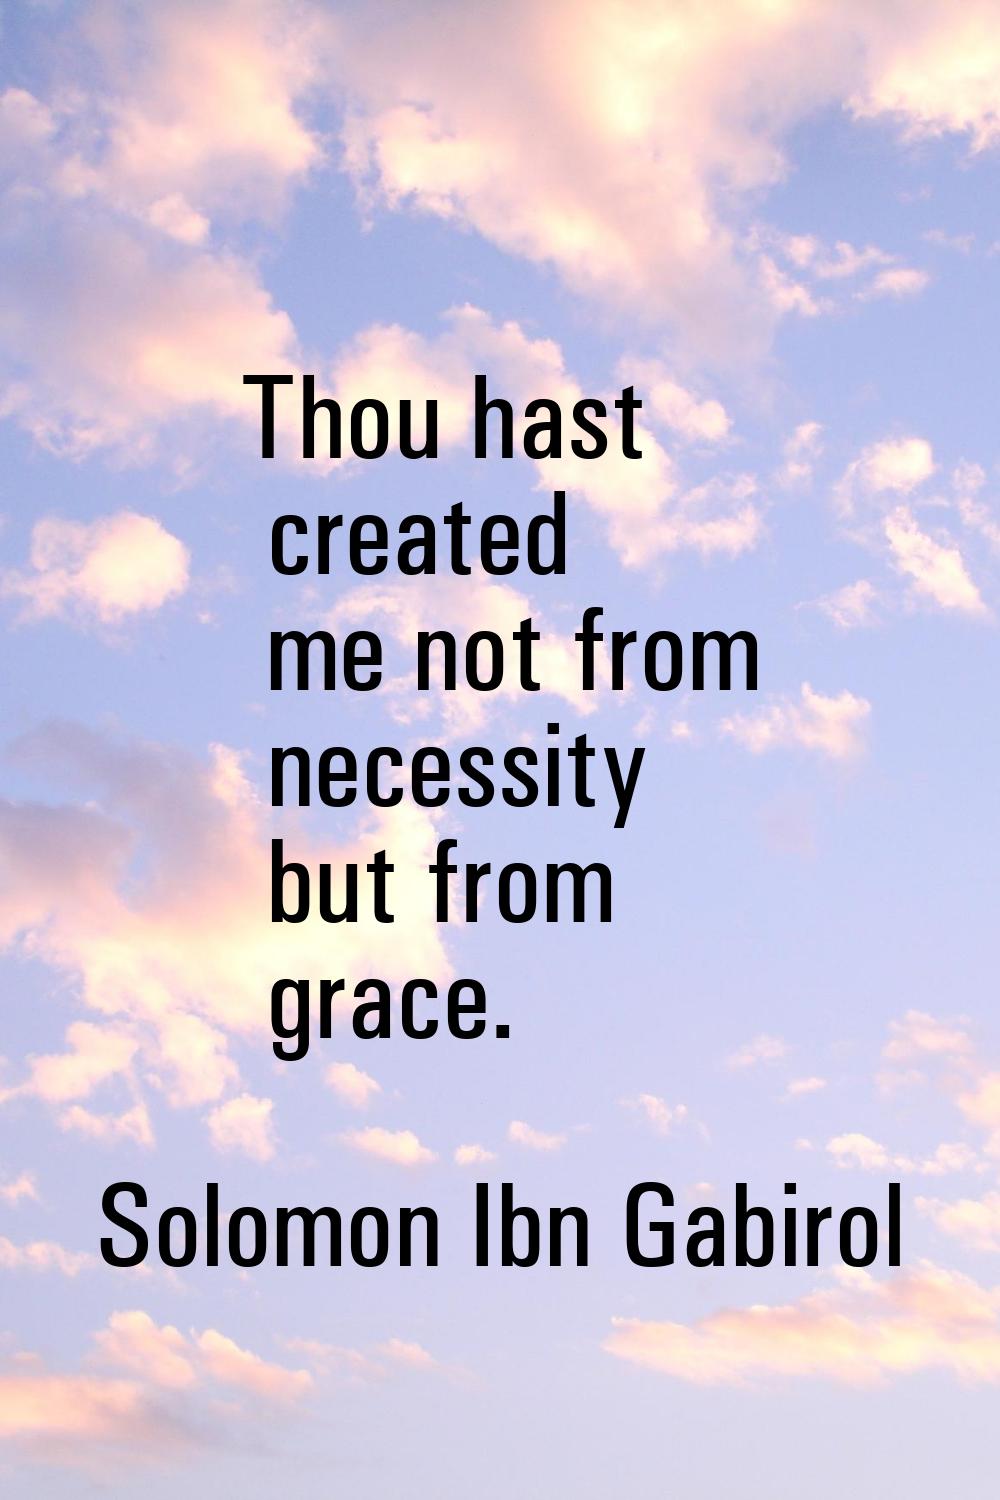 Thou hast created me not from necessity but from grace.